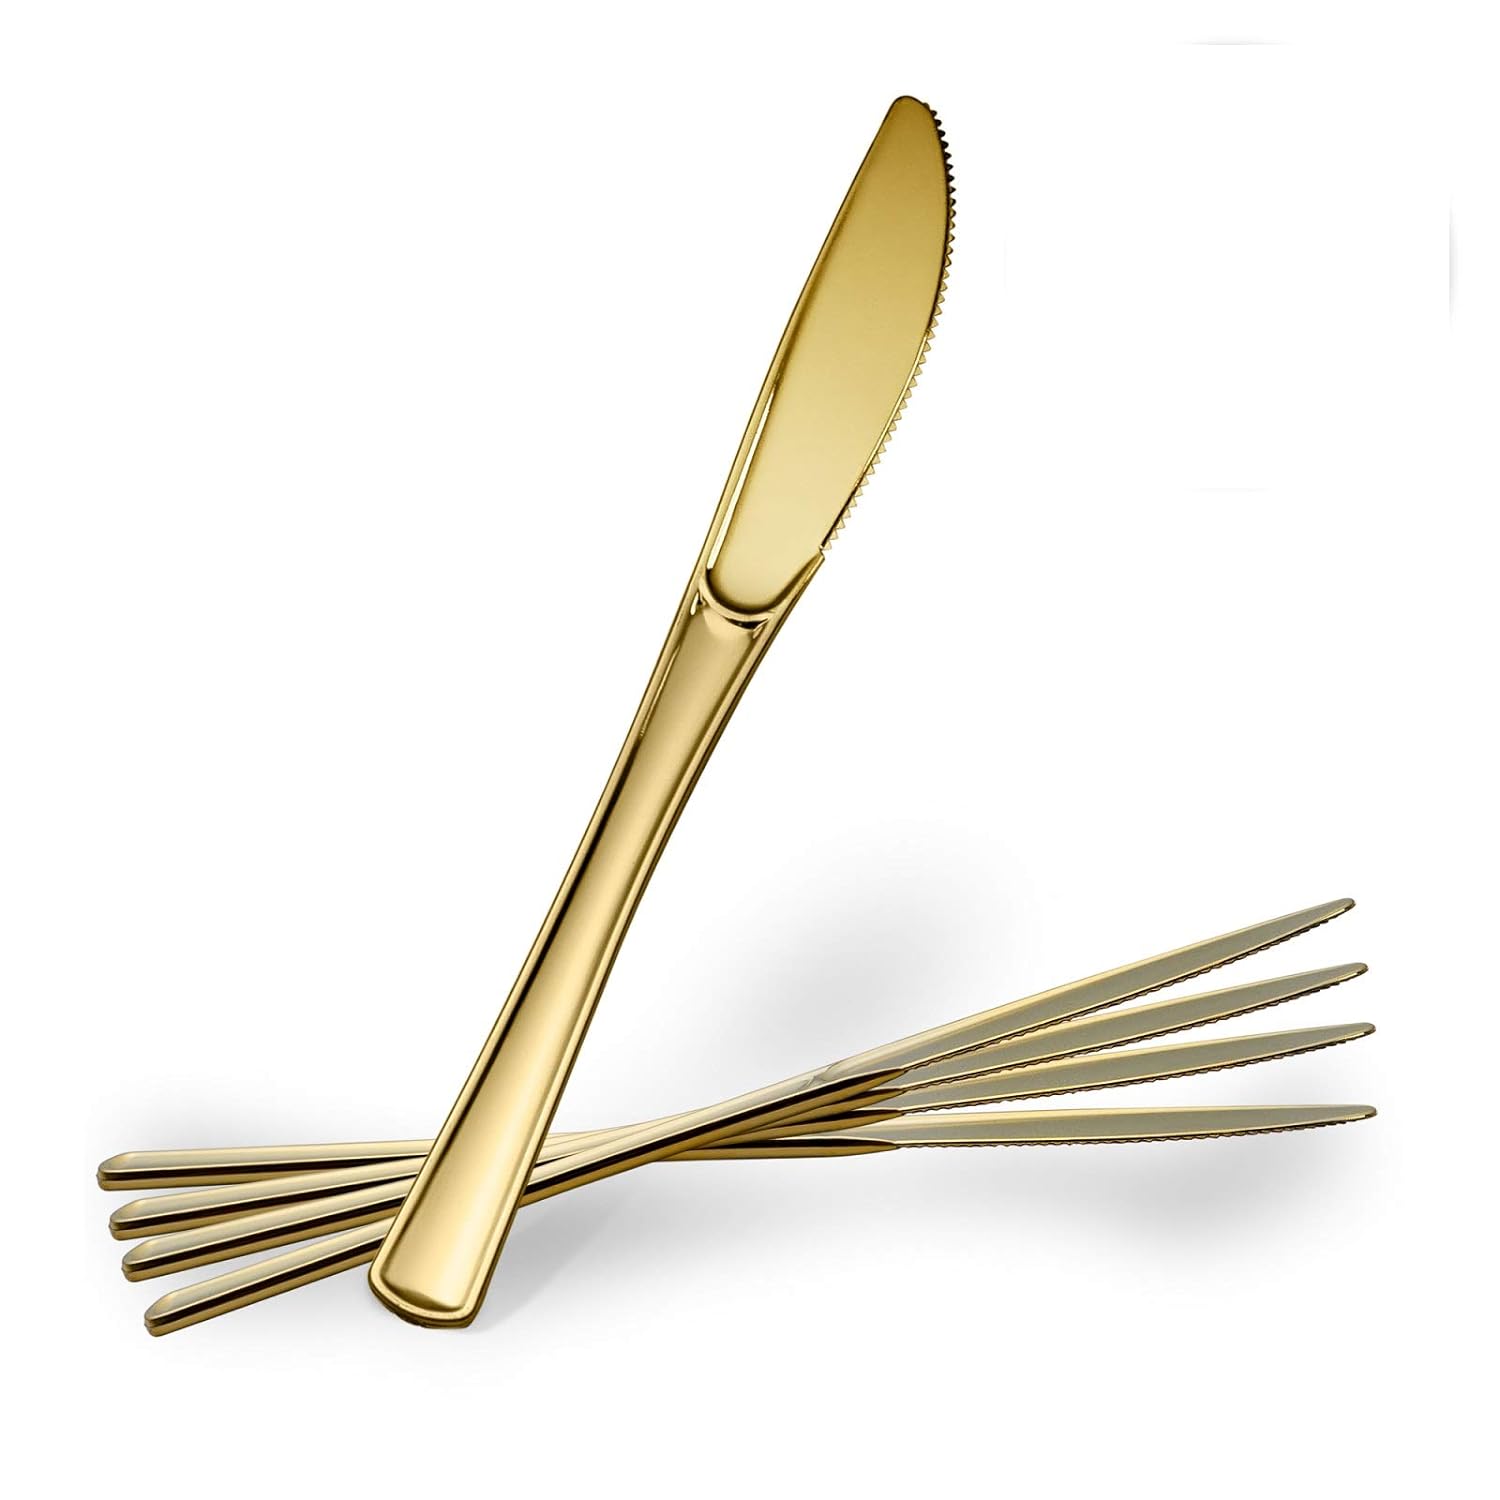 PlasticproDisposable Heavy Duty Gold Plastic Knives, Fancy Plastic Silverware Looks Like Real Gold Cutlery - Utensils Great for Catering Events, Restaurants, Parties and Weddings Pack of 40